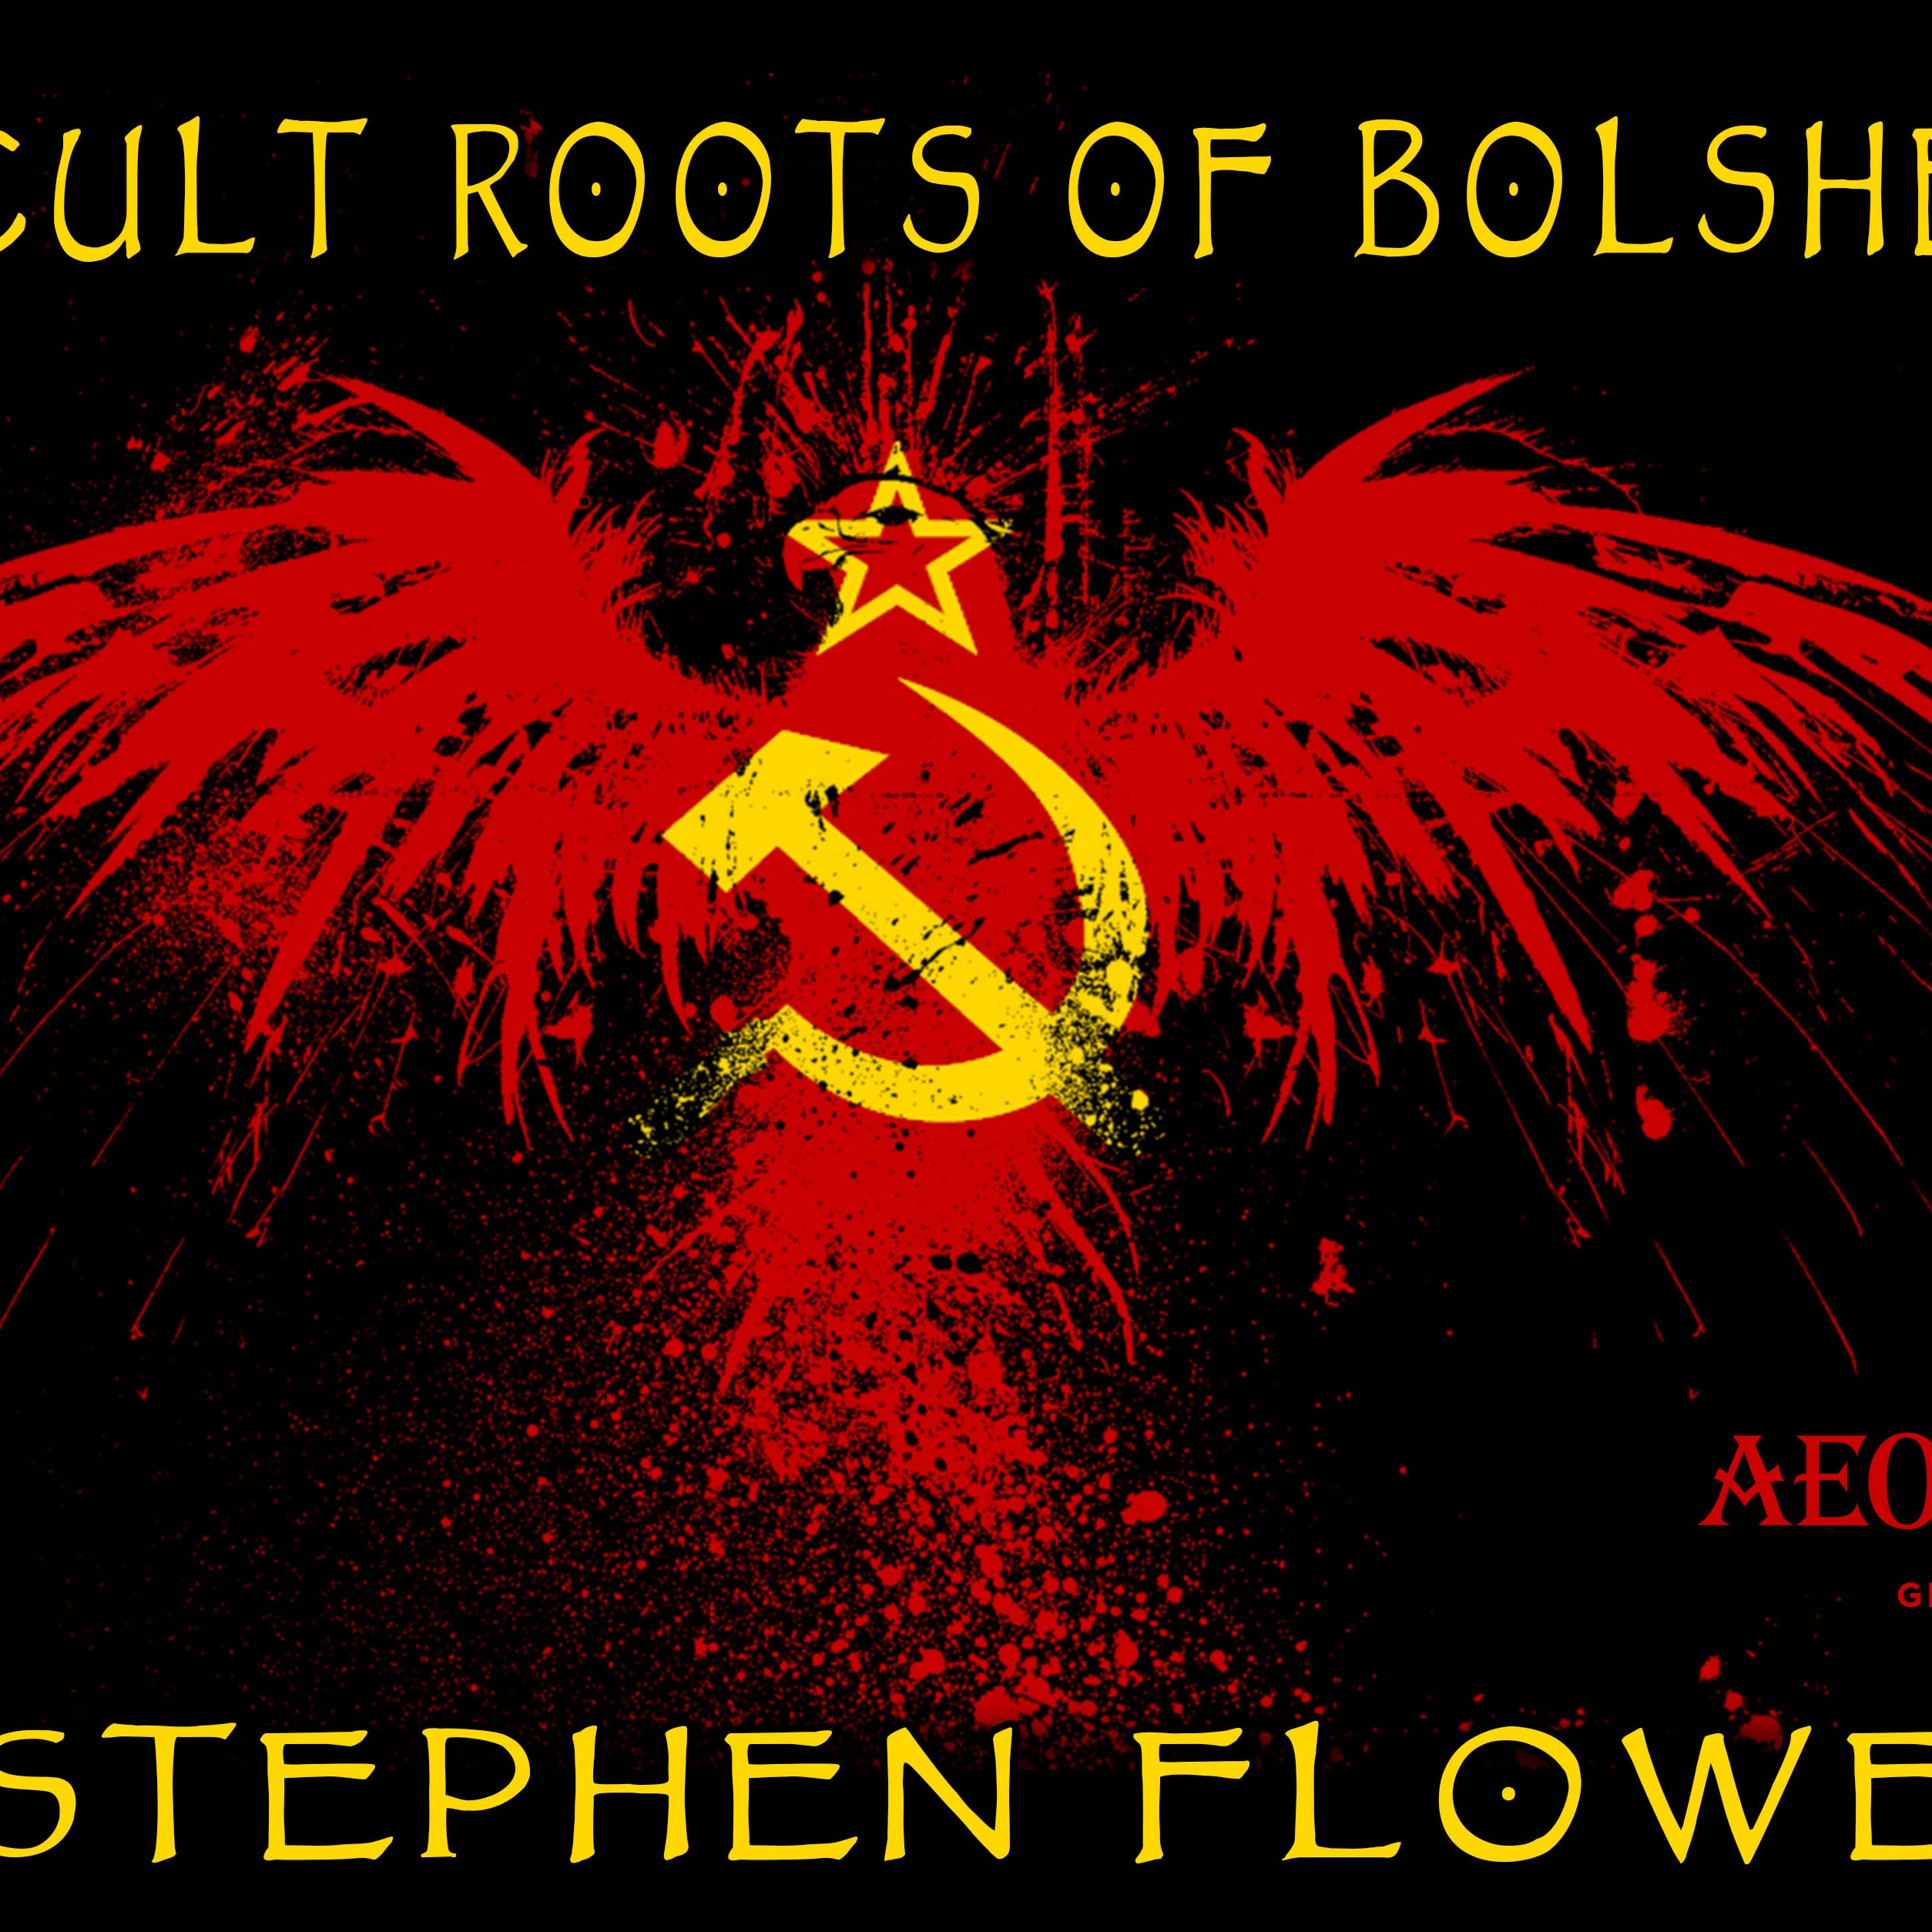 Dr. Stephen Flowers on The Occult Roots of Bolshevism